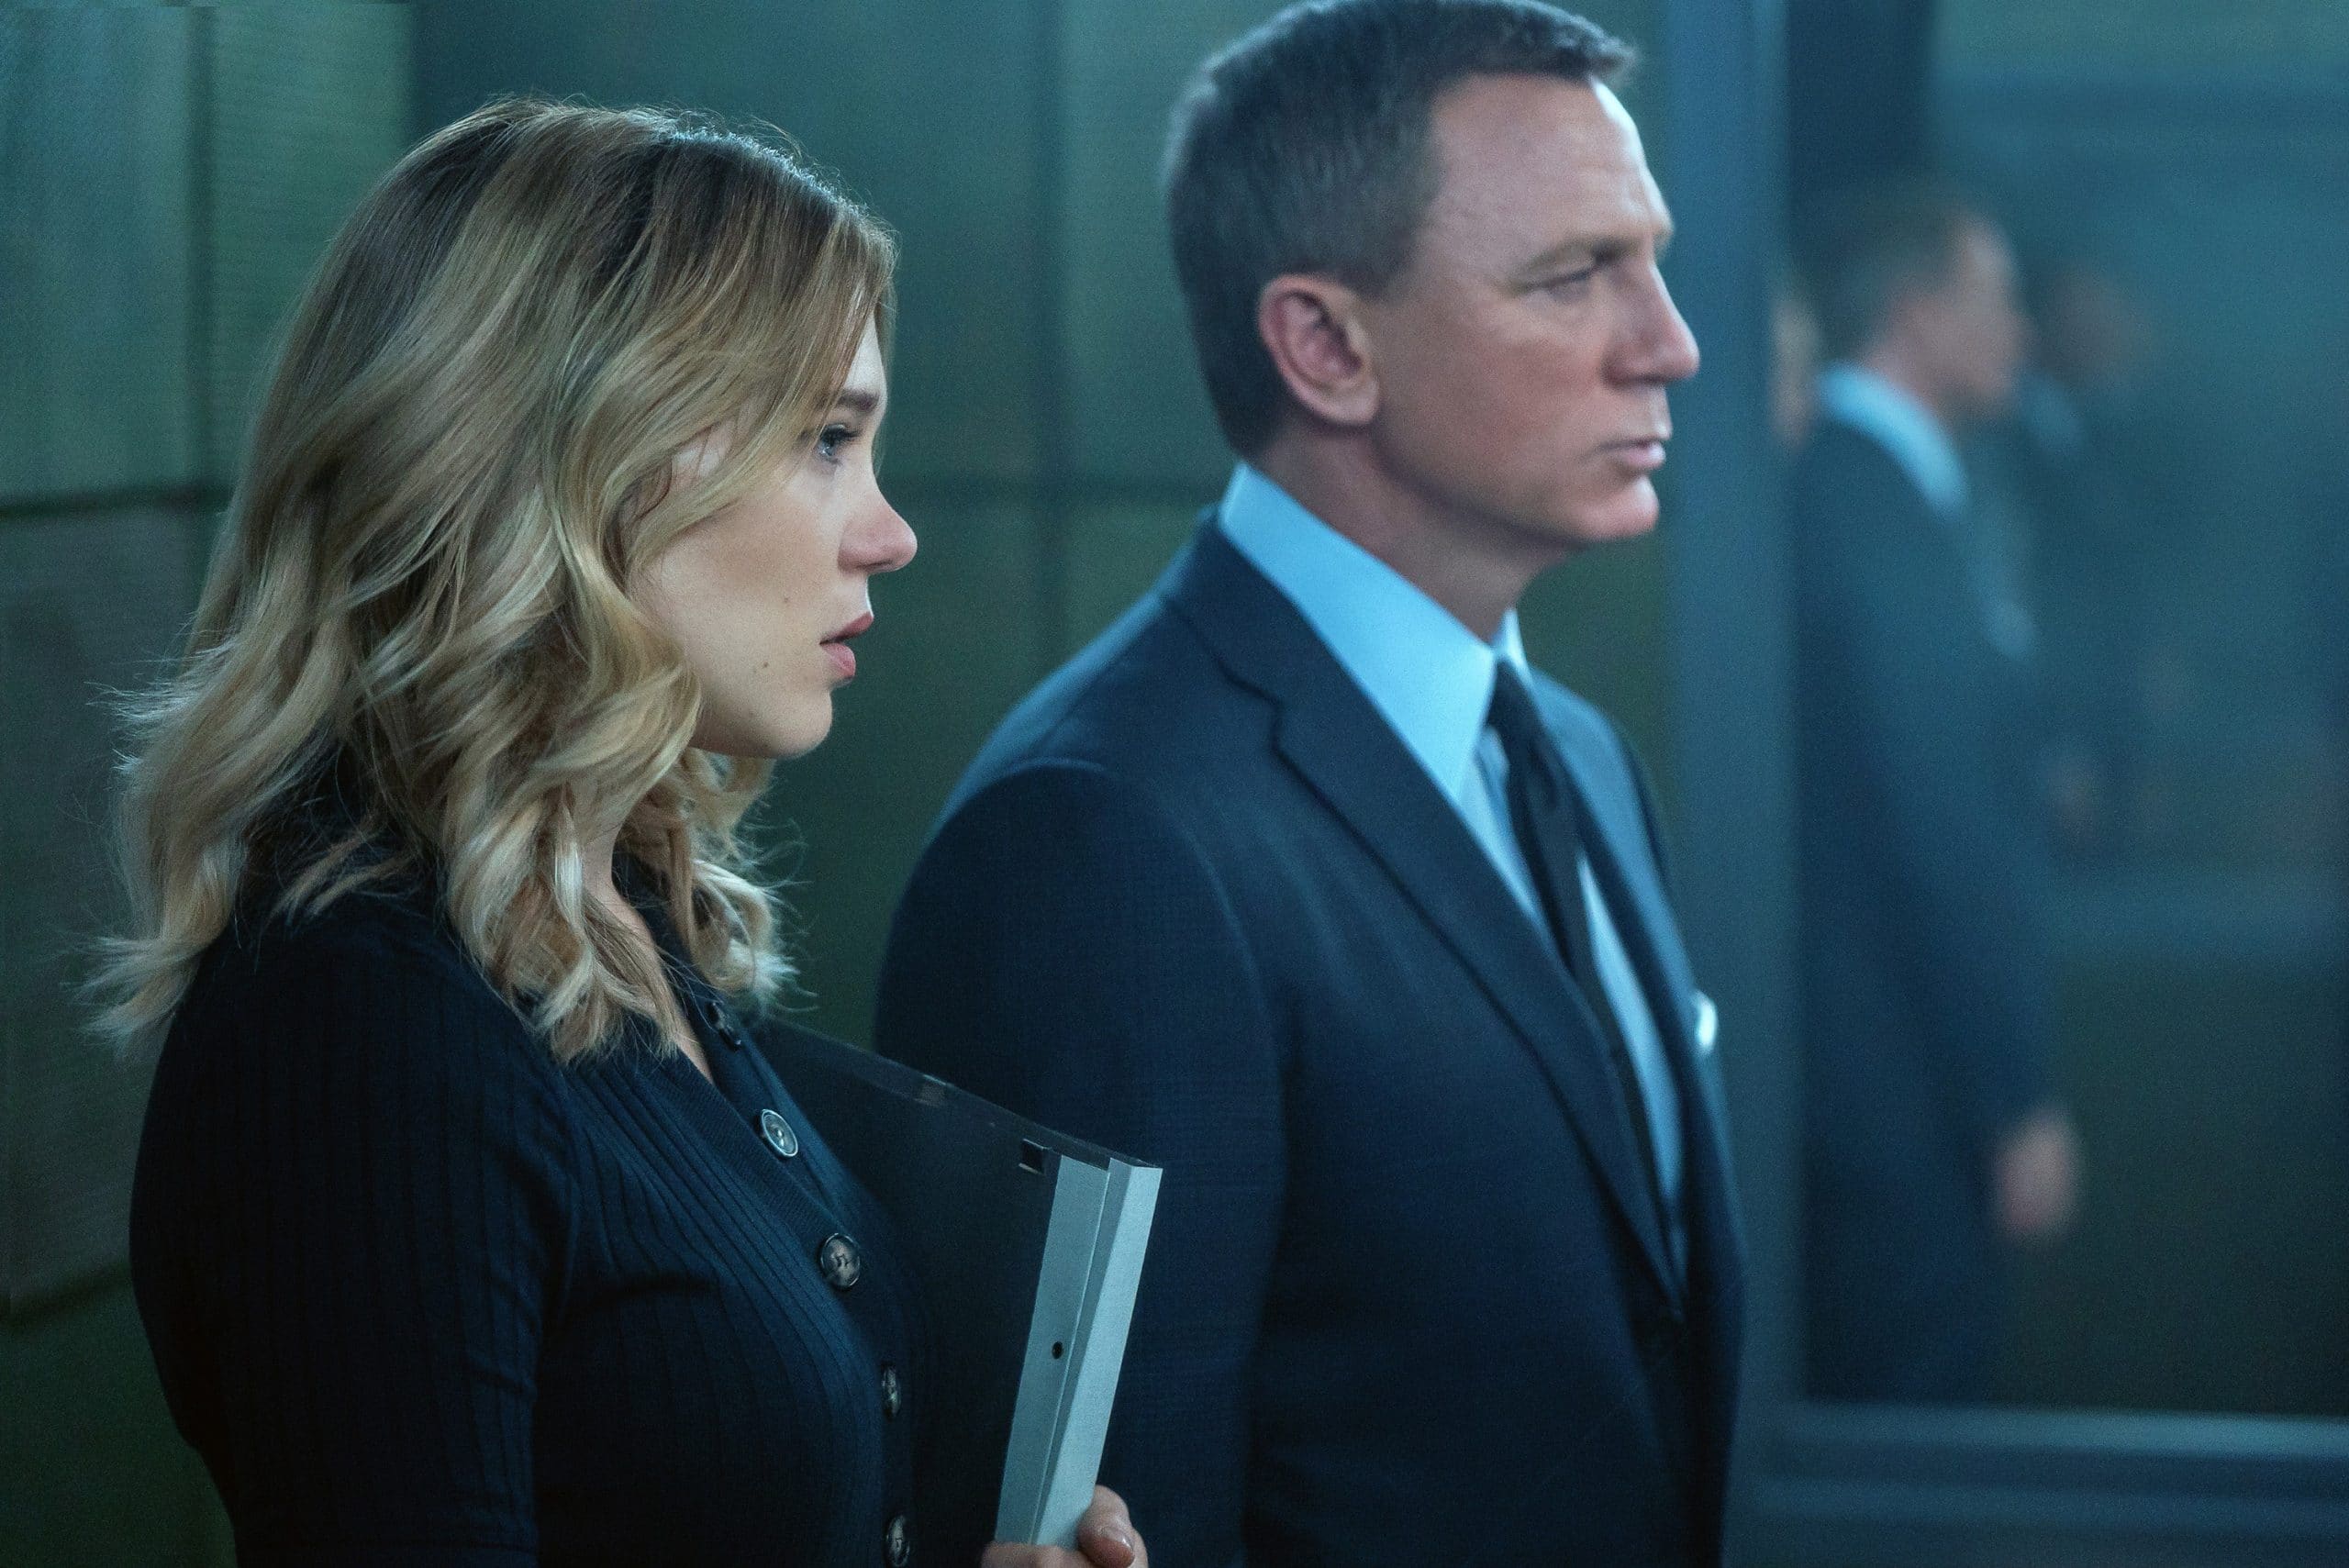 NO TIME TO DIE, from left: Lea Seydoux, Daniel Craig as James Bond, 2021